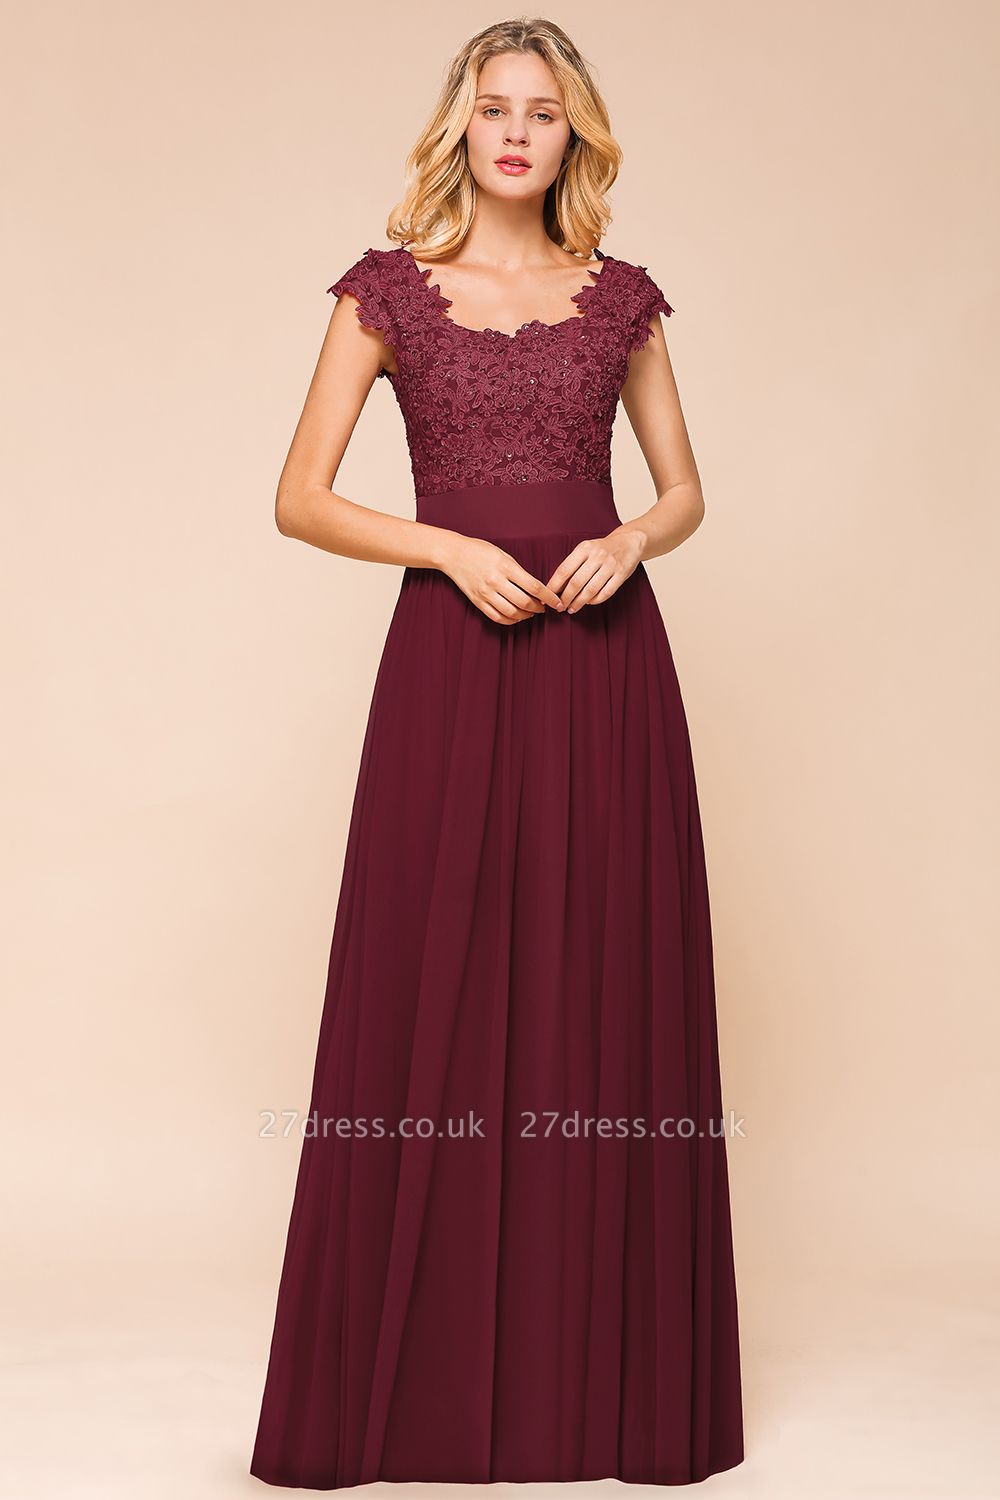 Sleeveless Lace Appliques Chiffon A-line Prom Gowns